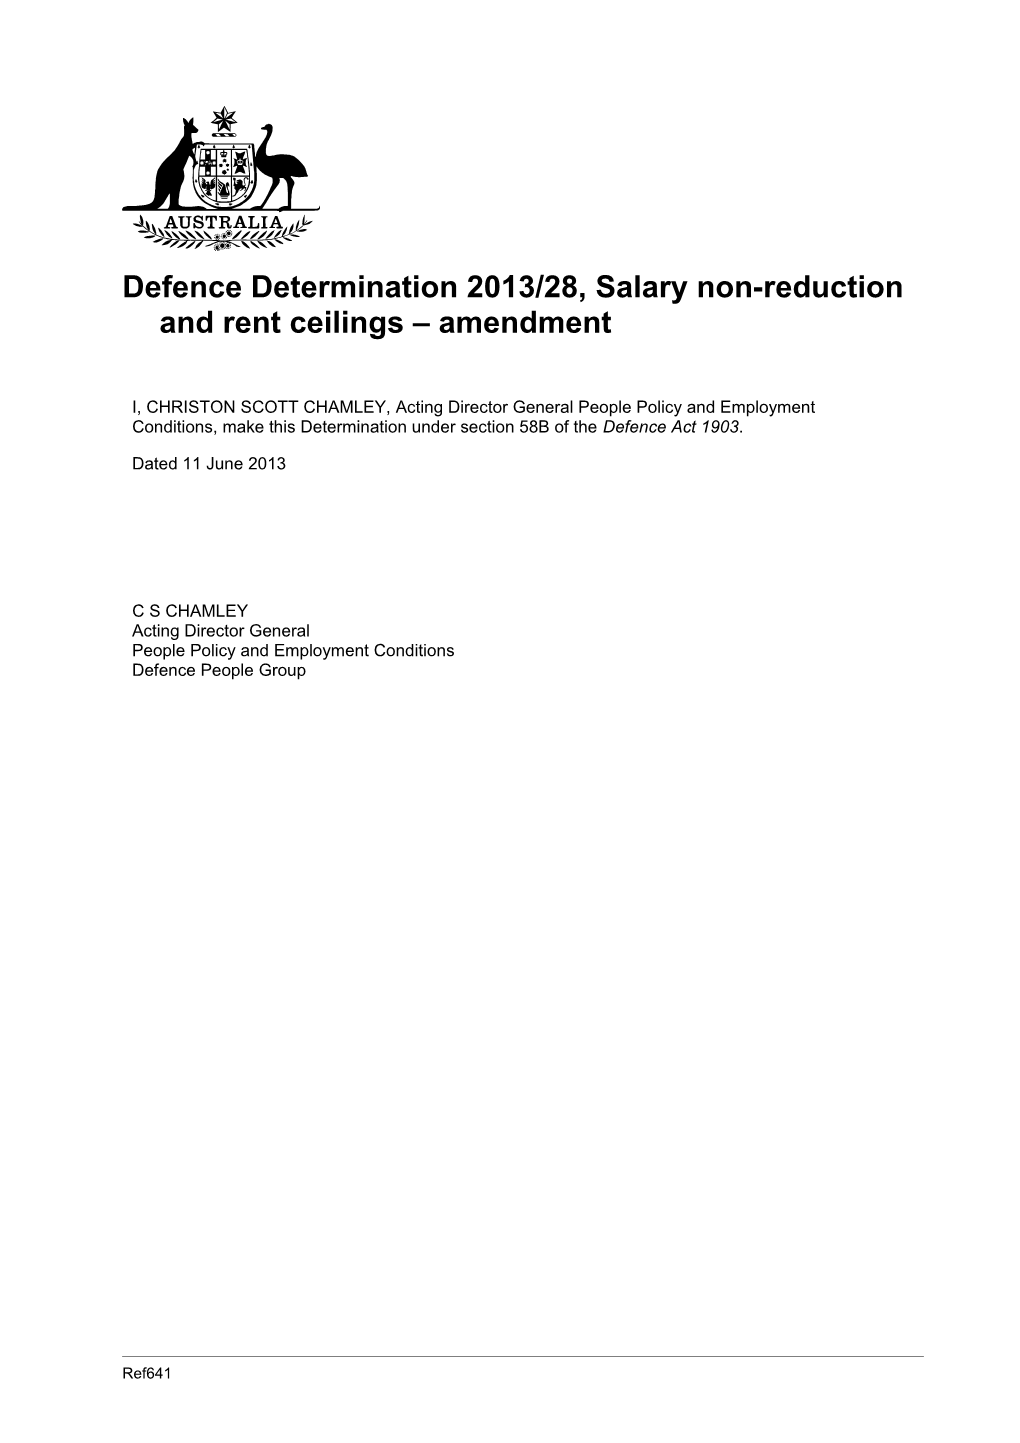 Defence Determination 2013/28, Salary Non-Reduction and Rent Ceilings Amendment